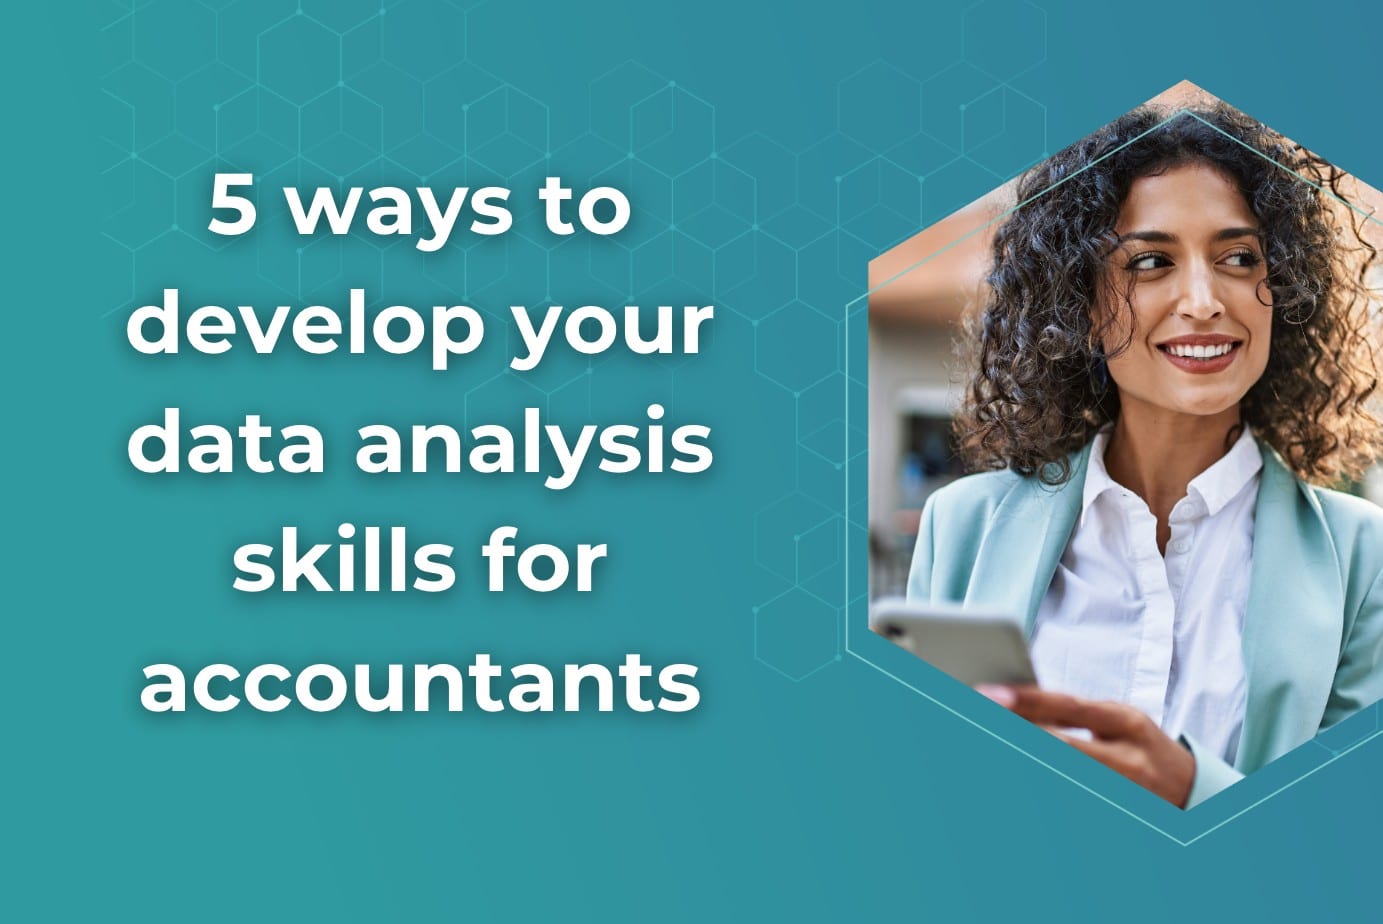 5 ways to develop your data analysis skills for accountants 